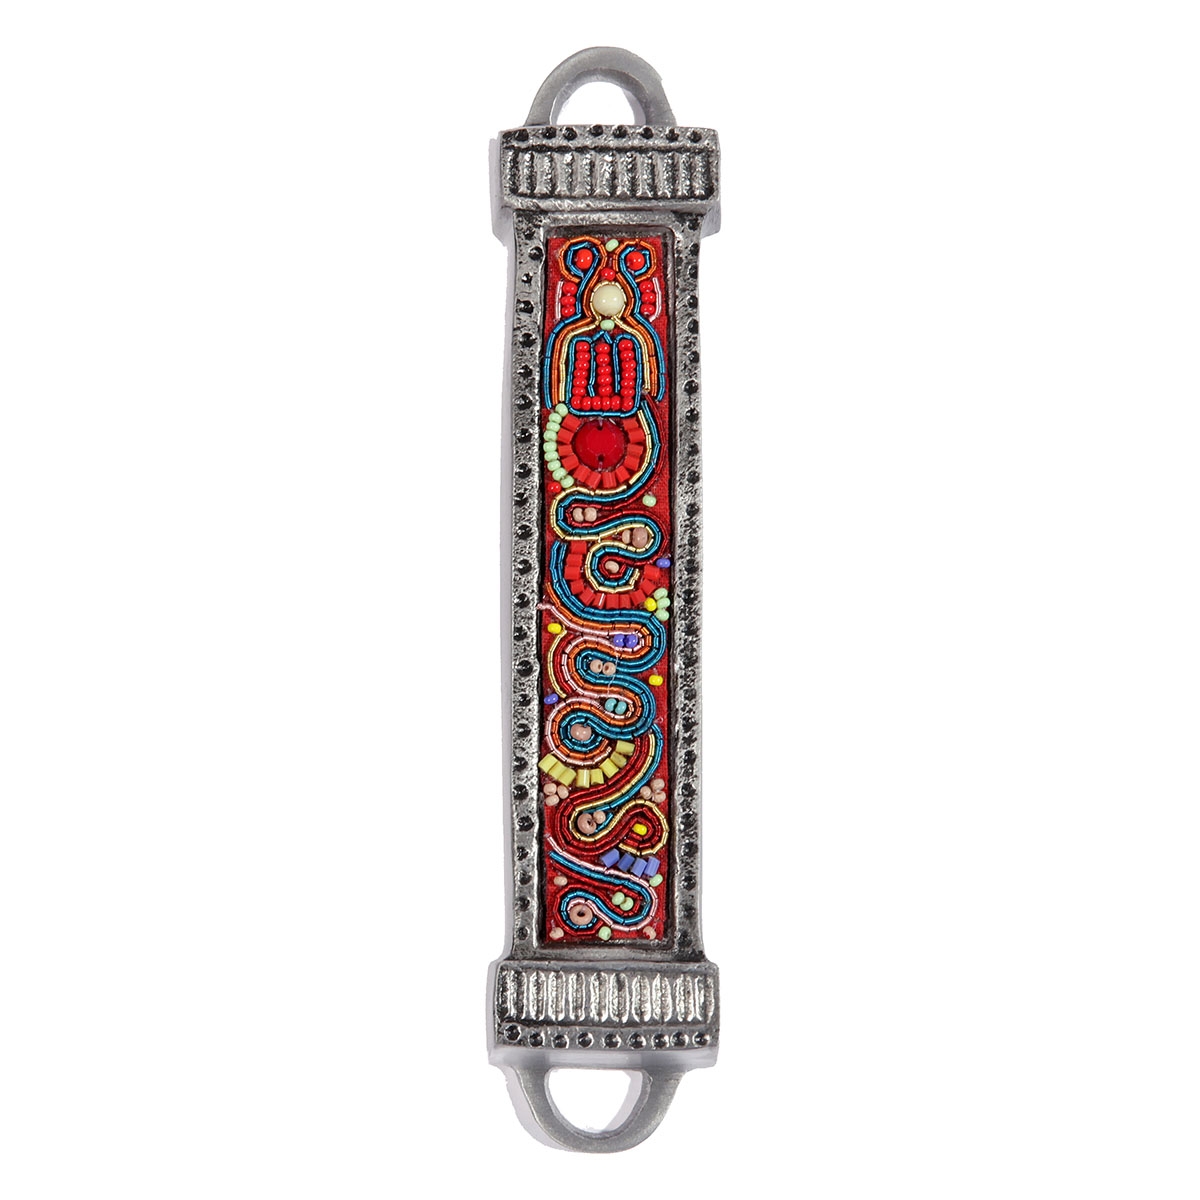 Yair Emanuel Aluminum Mezuzah with Embroidered Beads-Red/Blue - 1